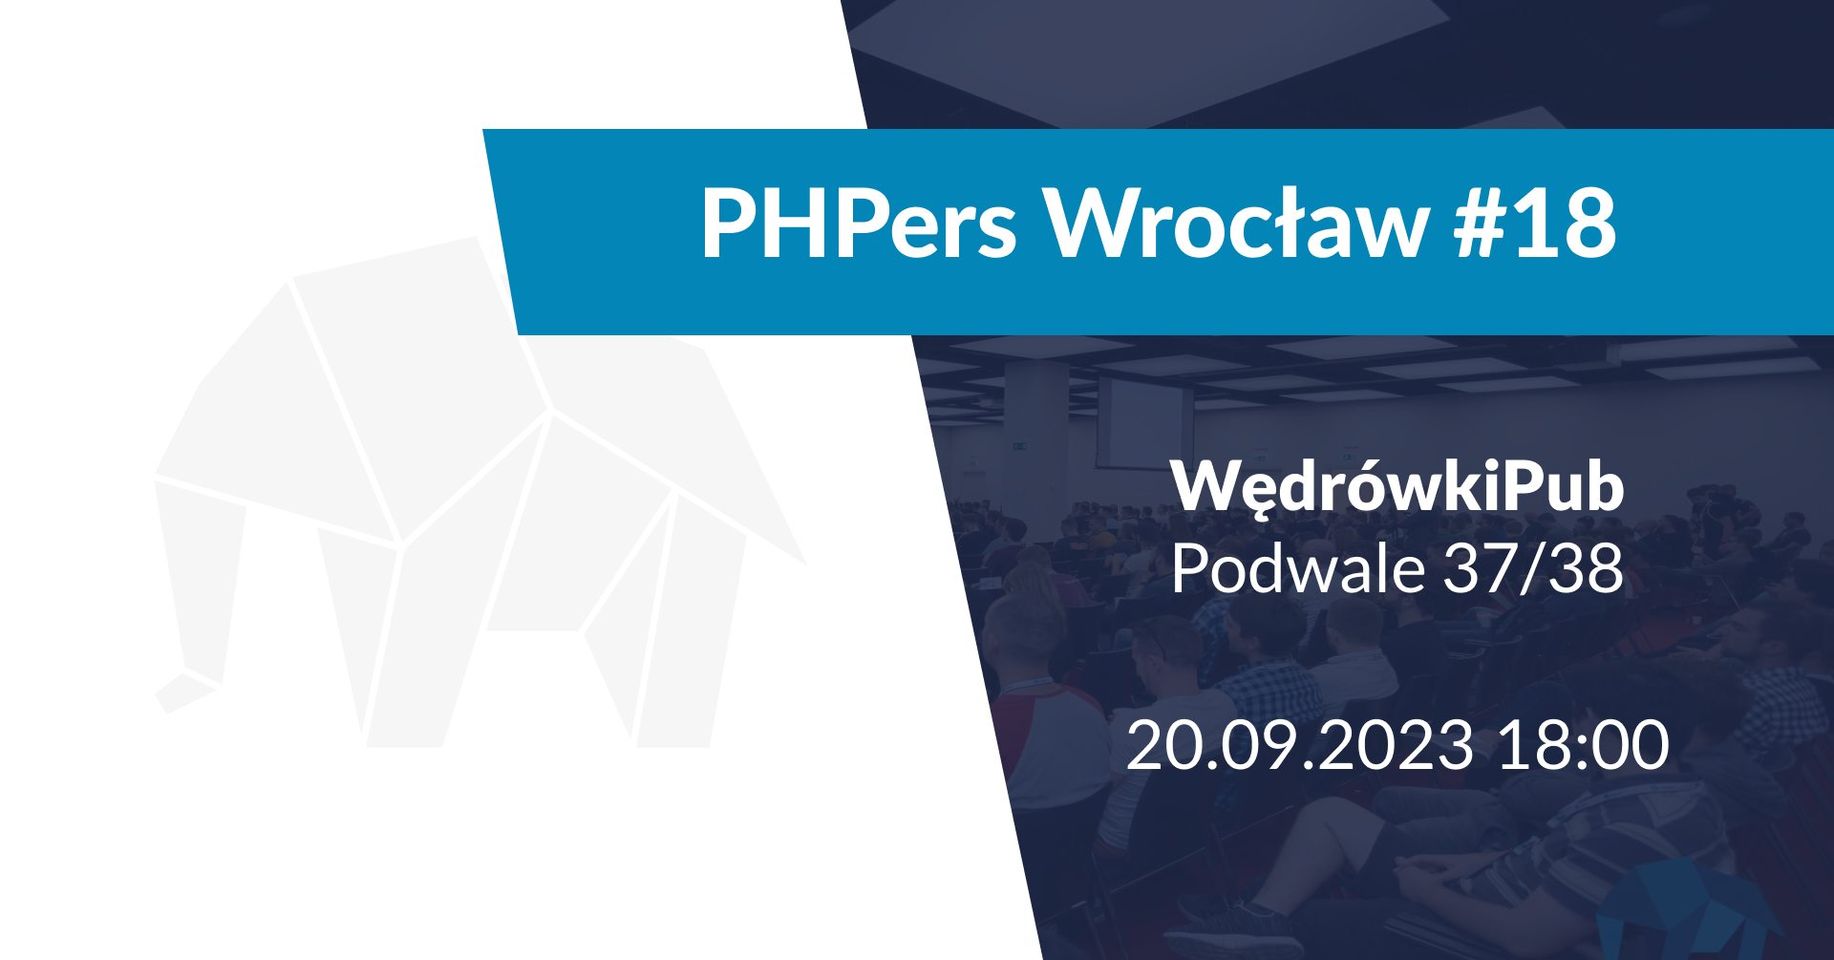 phpers-wroclaw-18